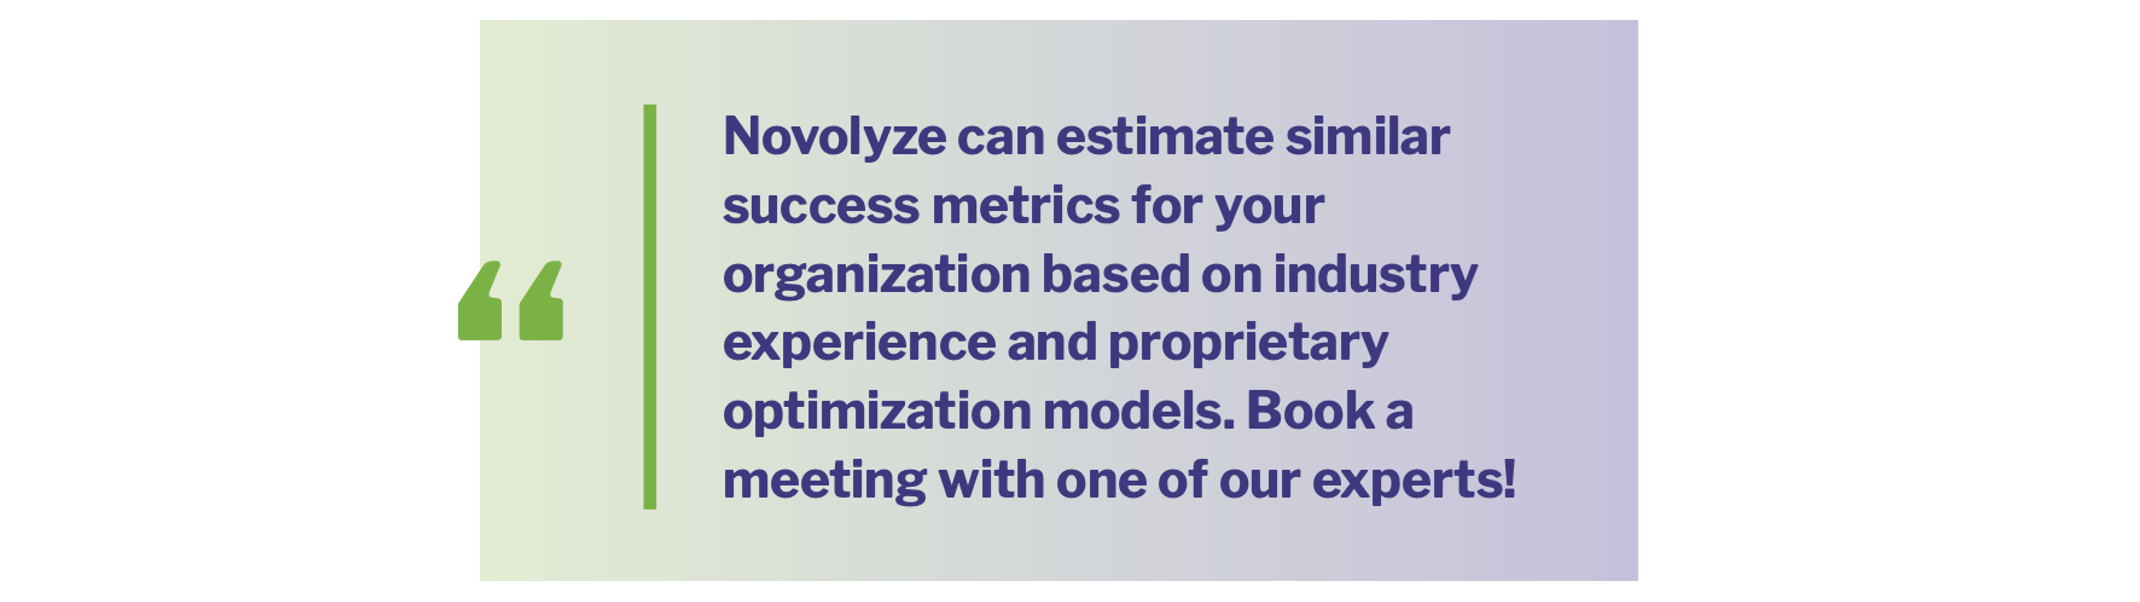 Novolyze can estimate similar success metrics for your organization based on industry experience and proprietary optimization models. Book a meeting with one of our experts!